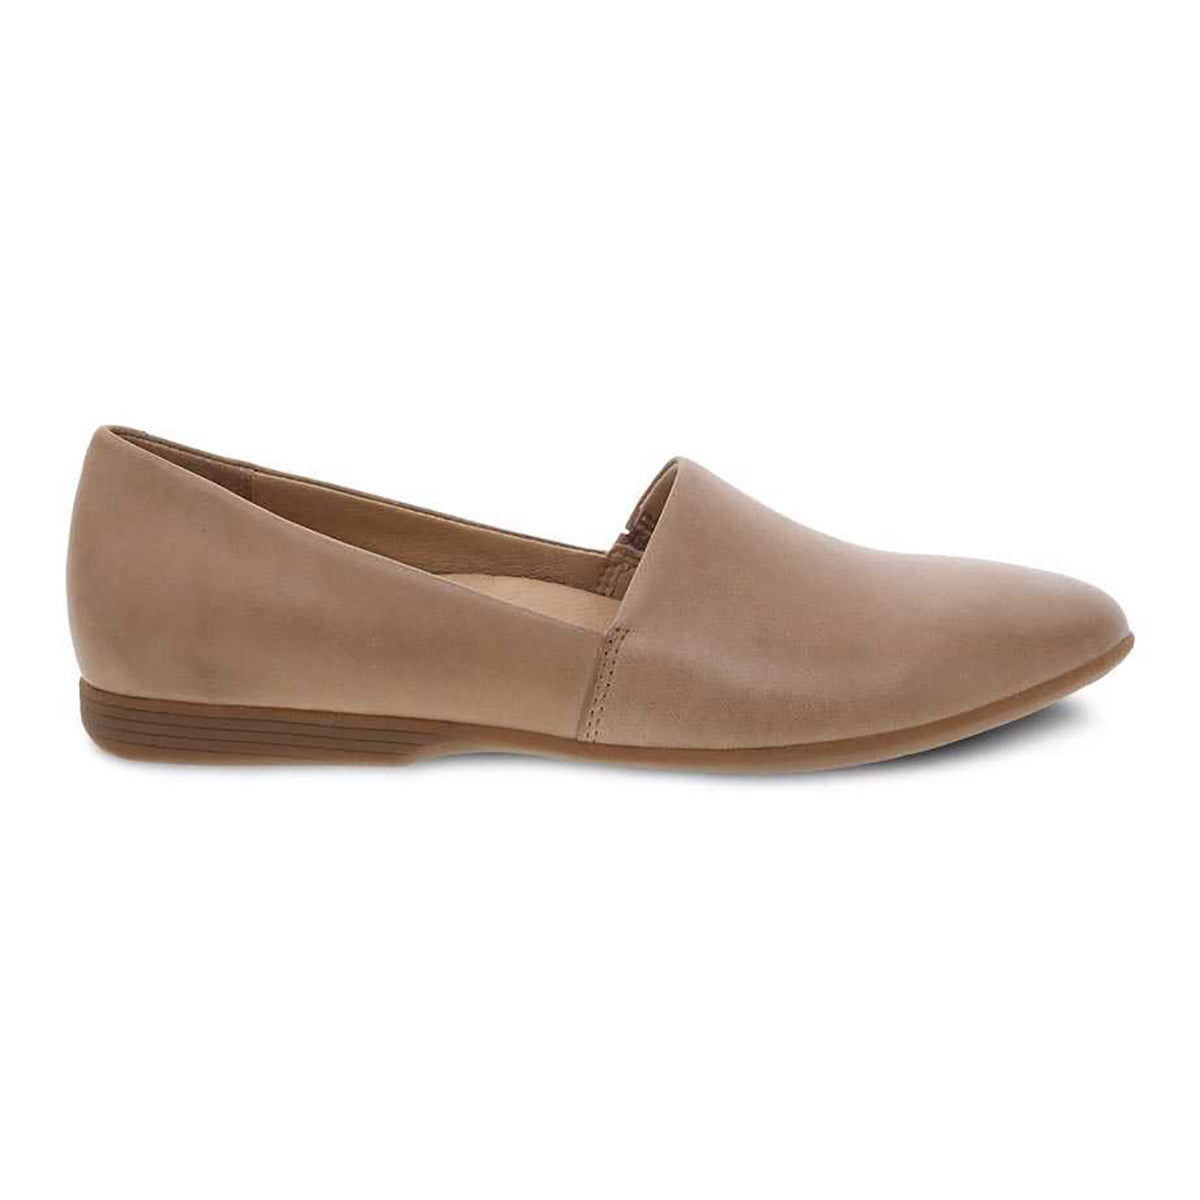 A single beige Dansko Larisa tan women's flat shoe with arch support against a white background.